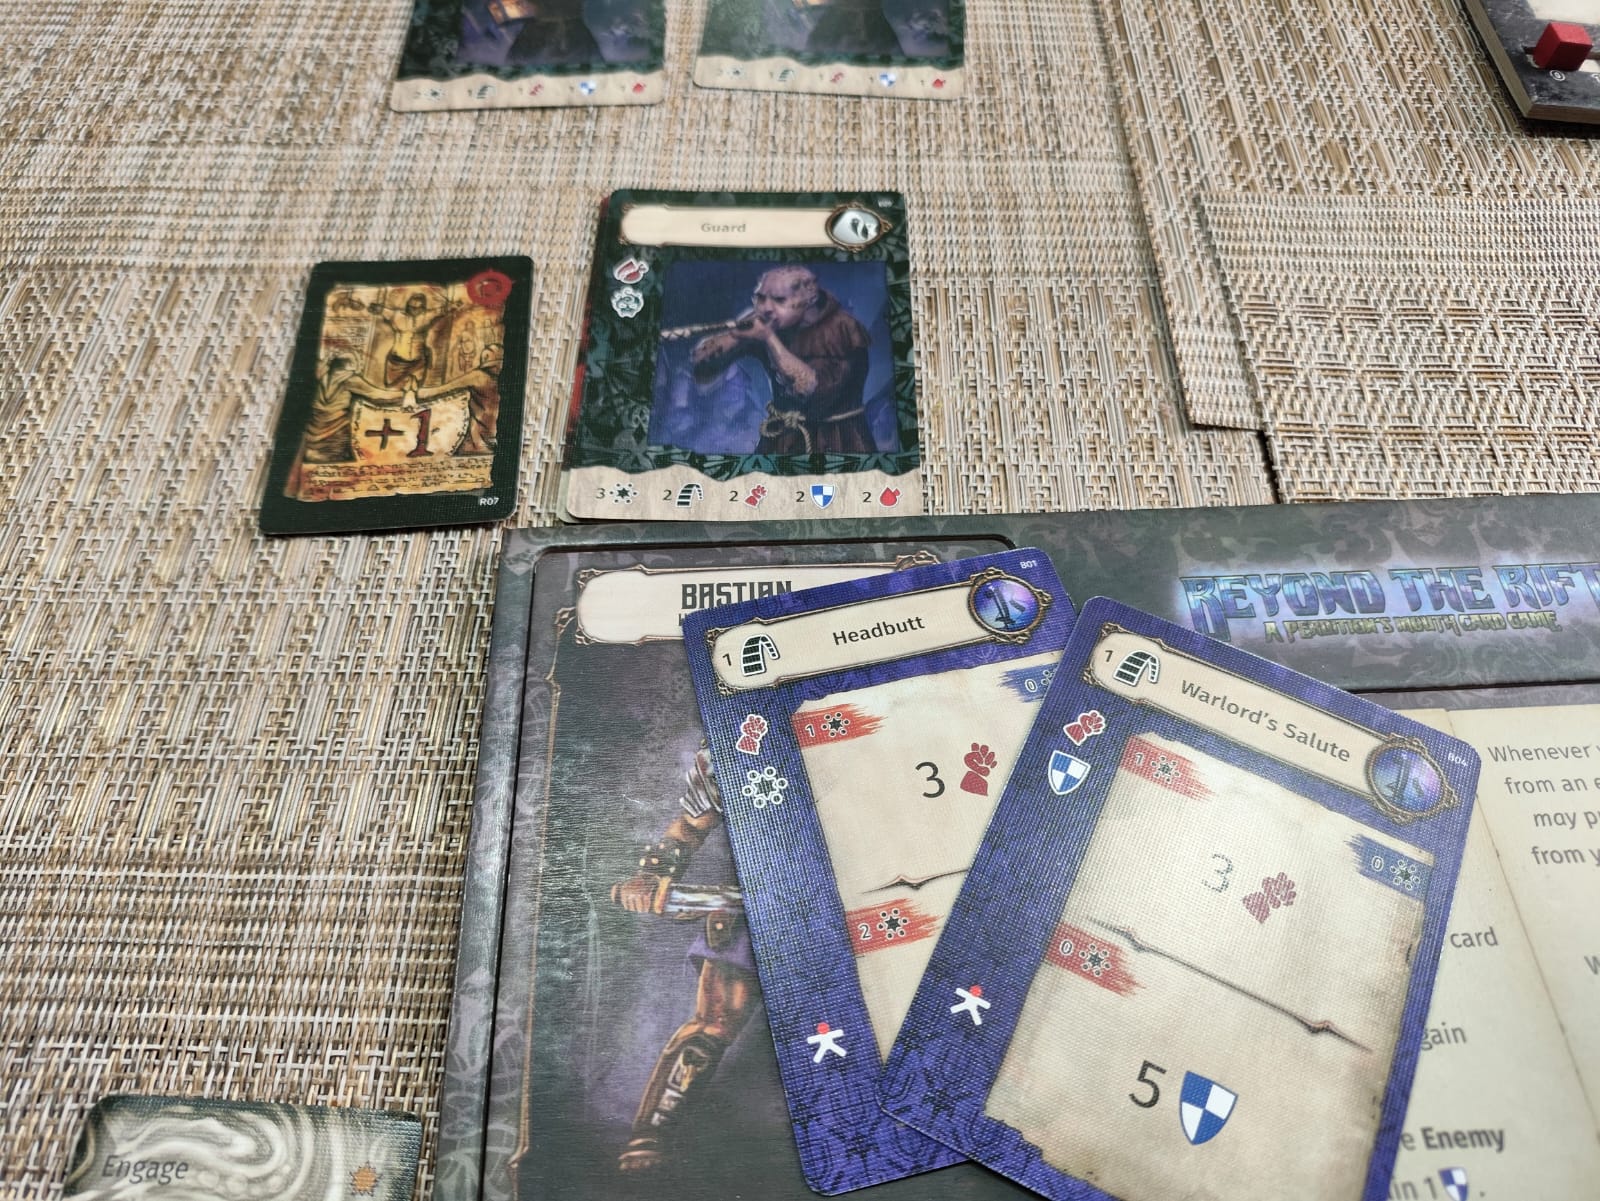 Reseña Beyond the Rift: A Perdition's Mouth Card Game 48